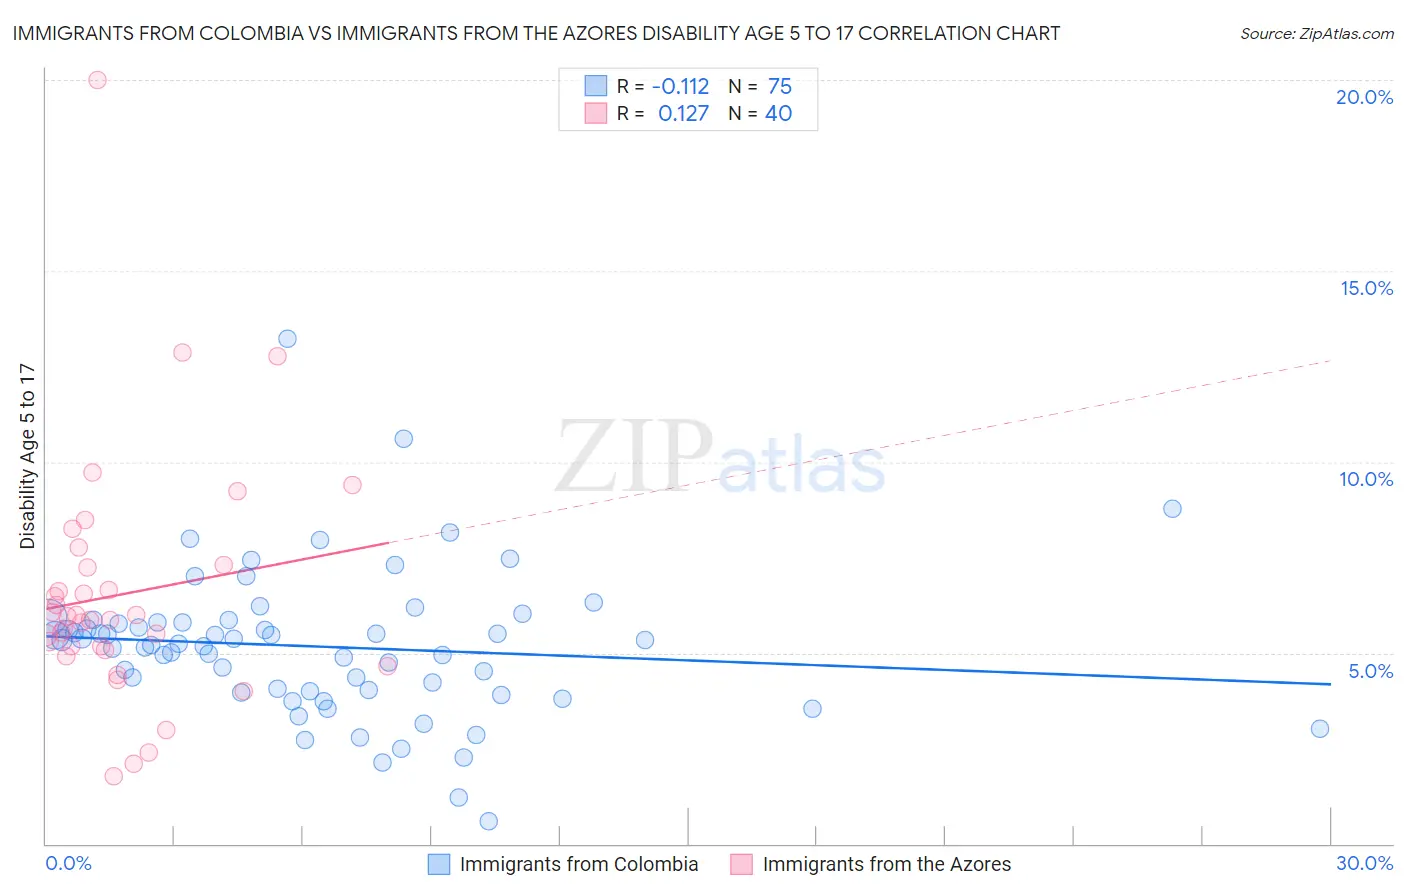 Immigrants from Colombia vs Immigrants from the Azores Disability Age 5 to 17